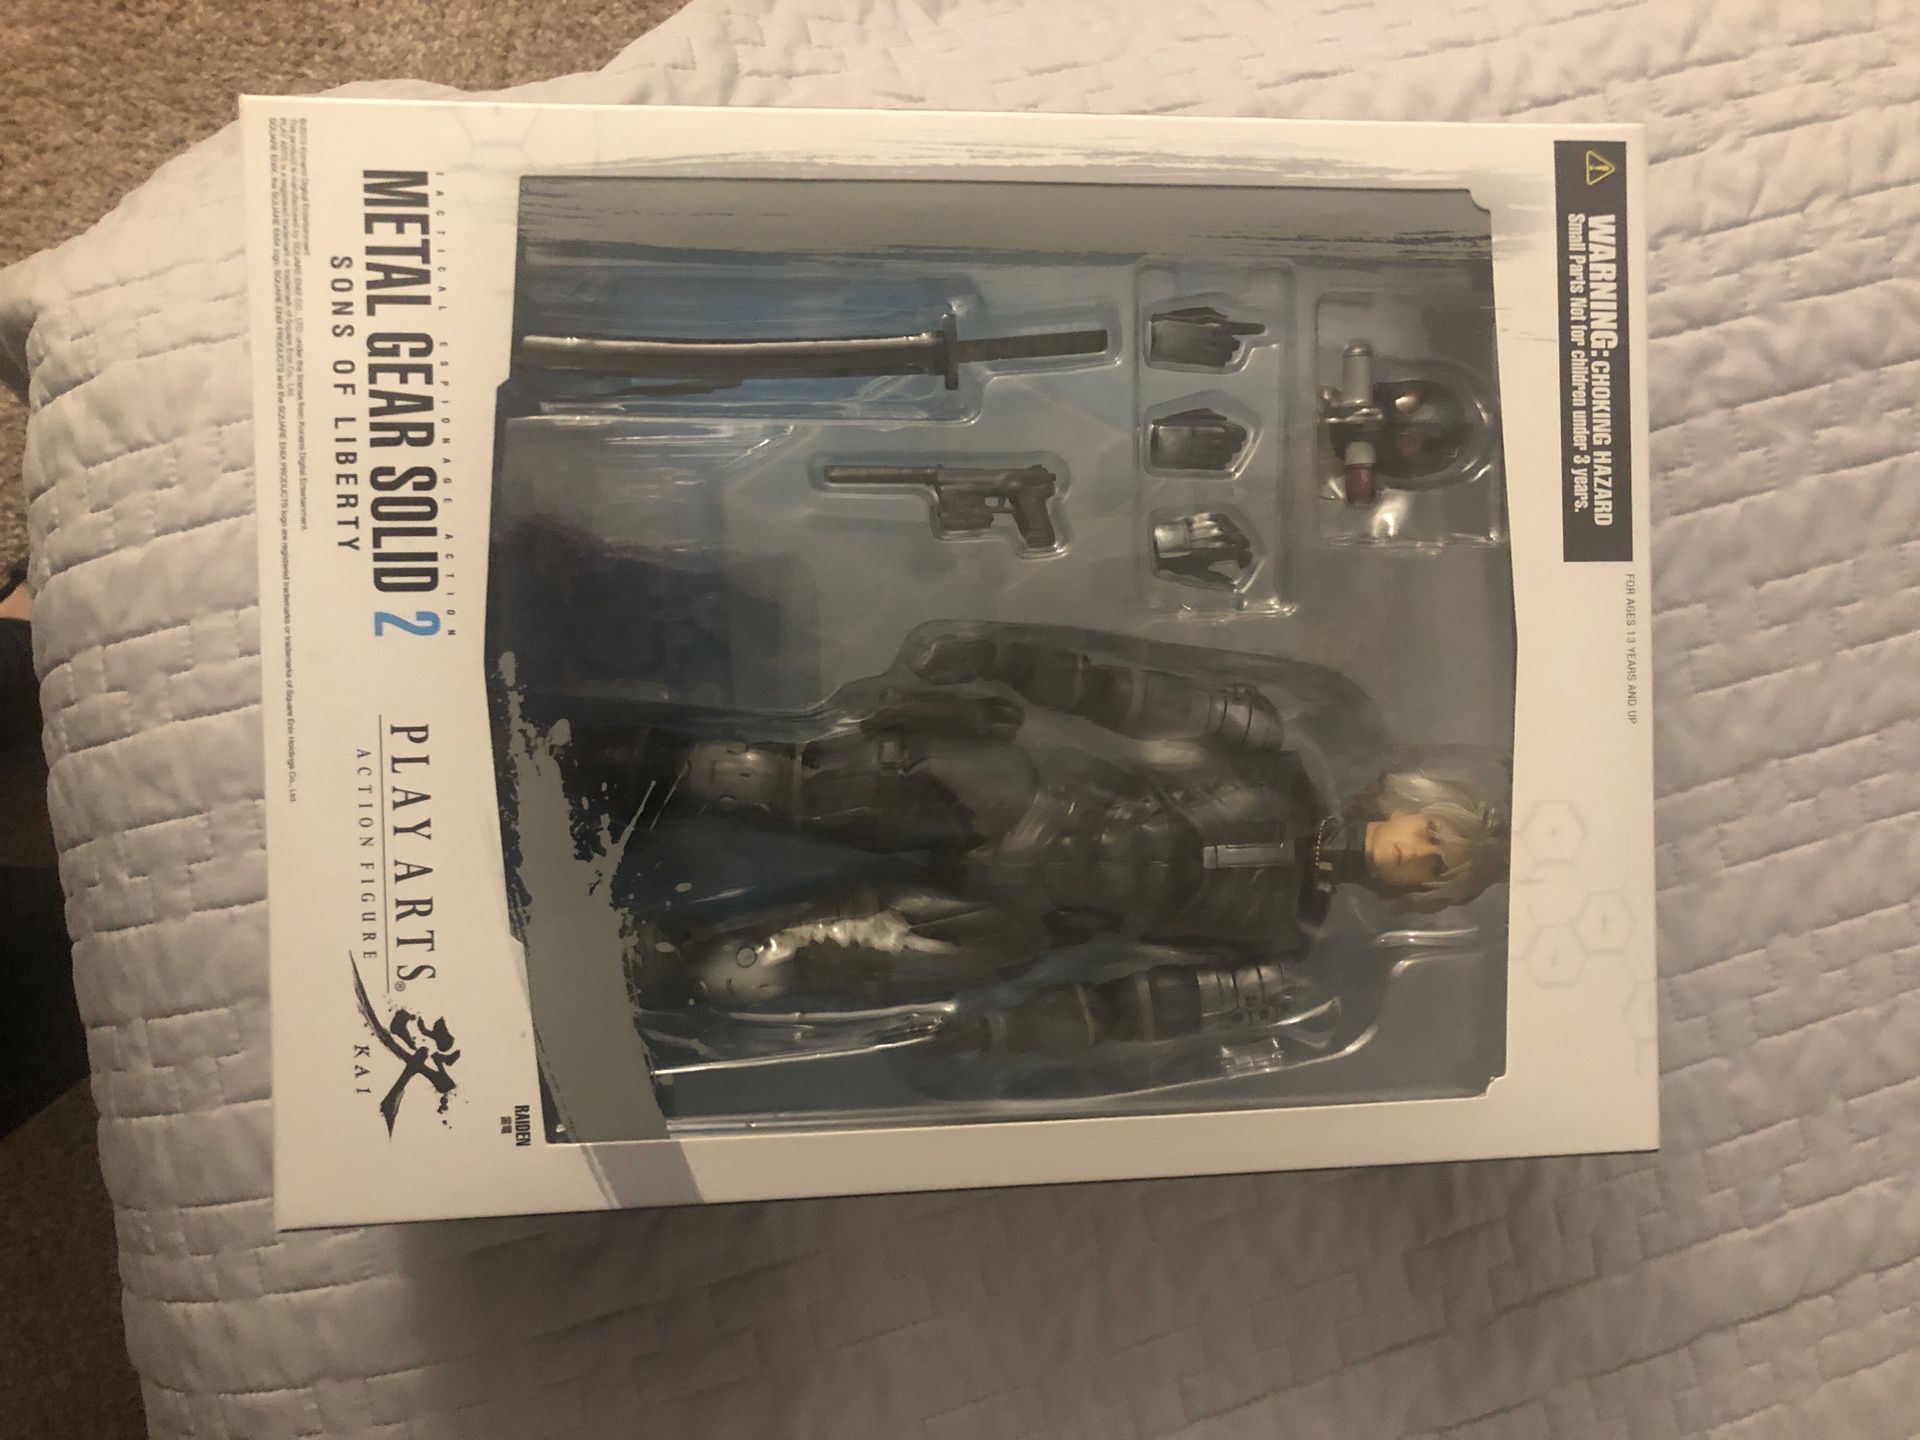 Metal Gear solid 2 sons of liberty action figure